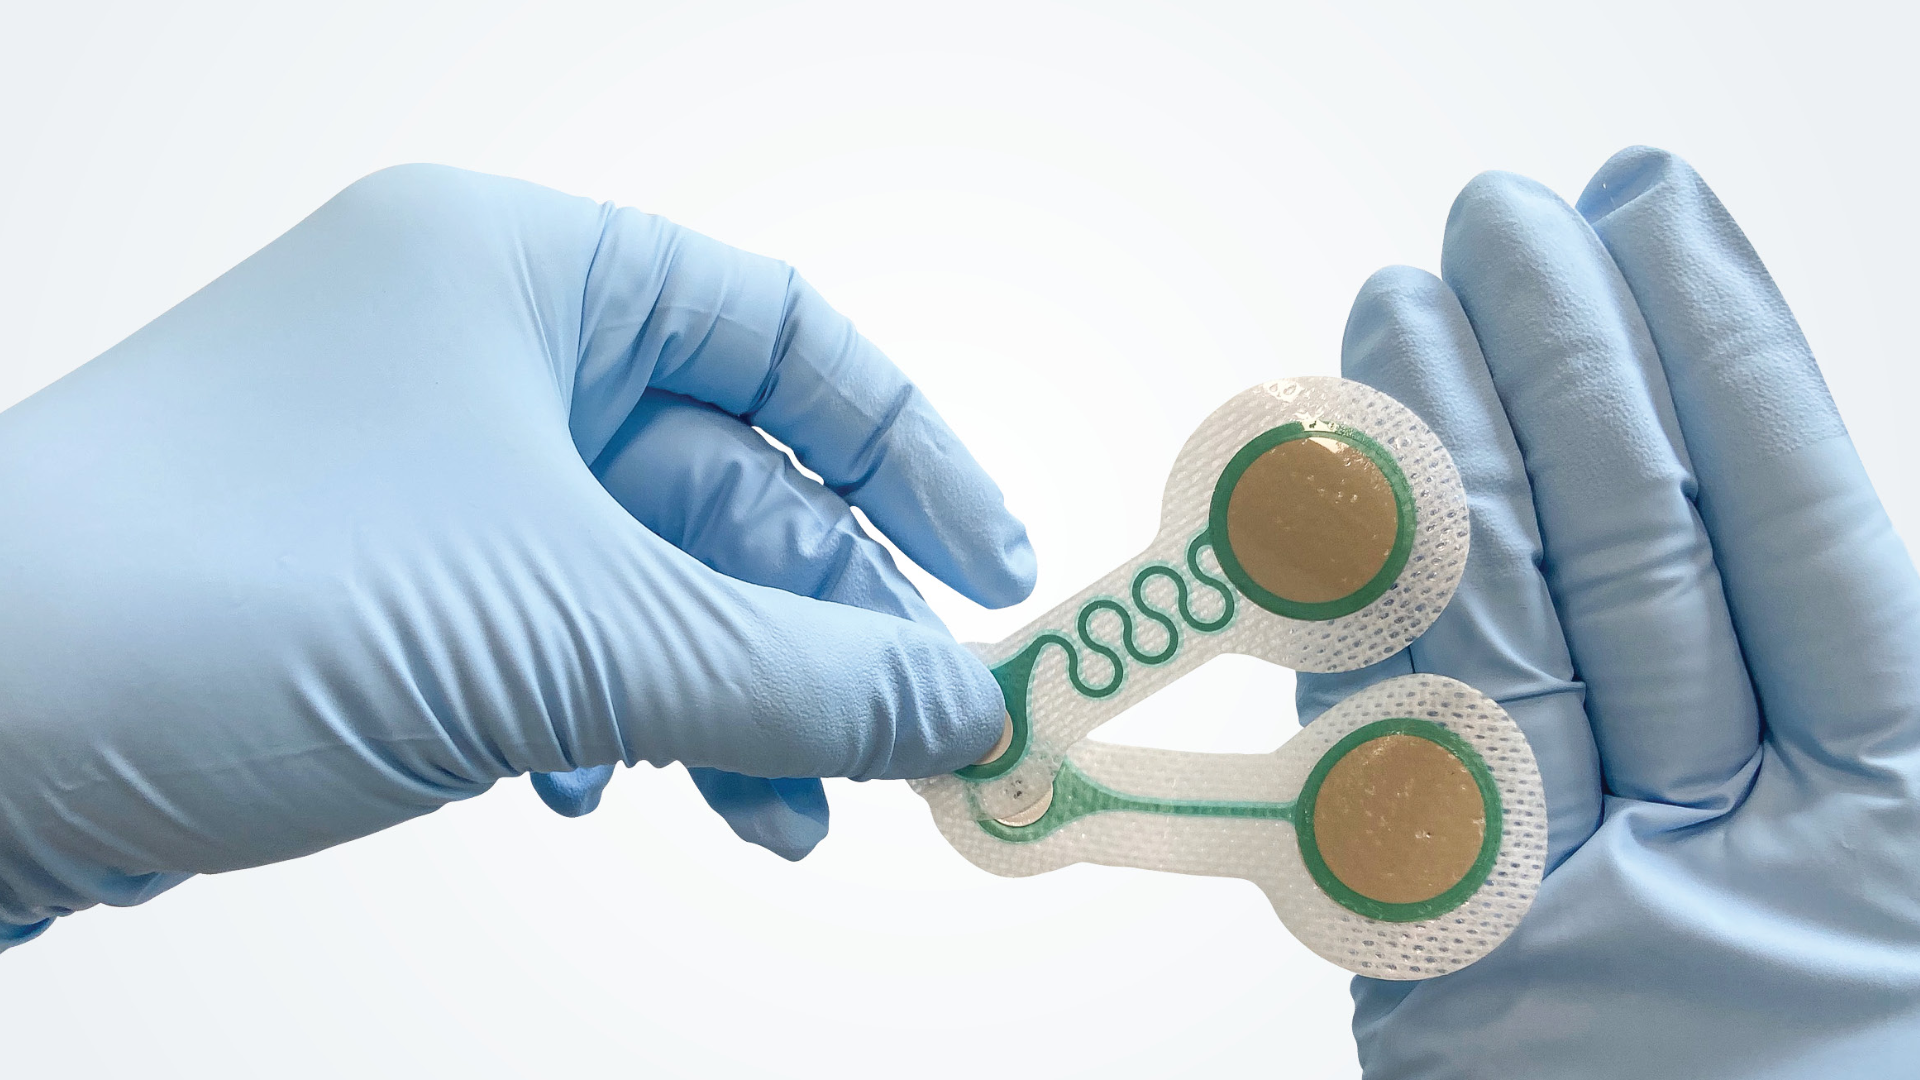 Printed Electronics: Henkel and Quad Industries Offer Unique Solution for Faster Development of Health Patches